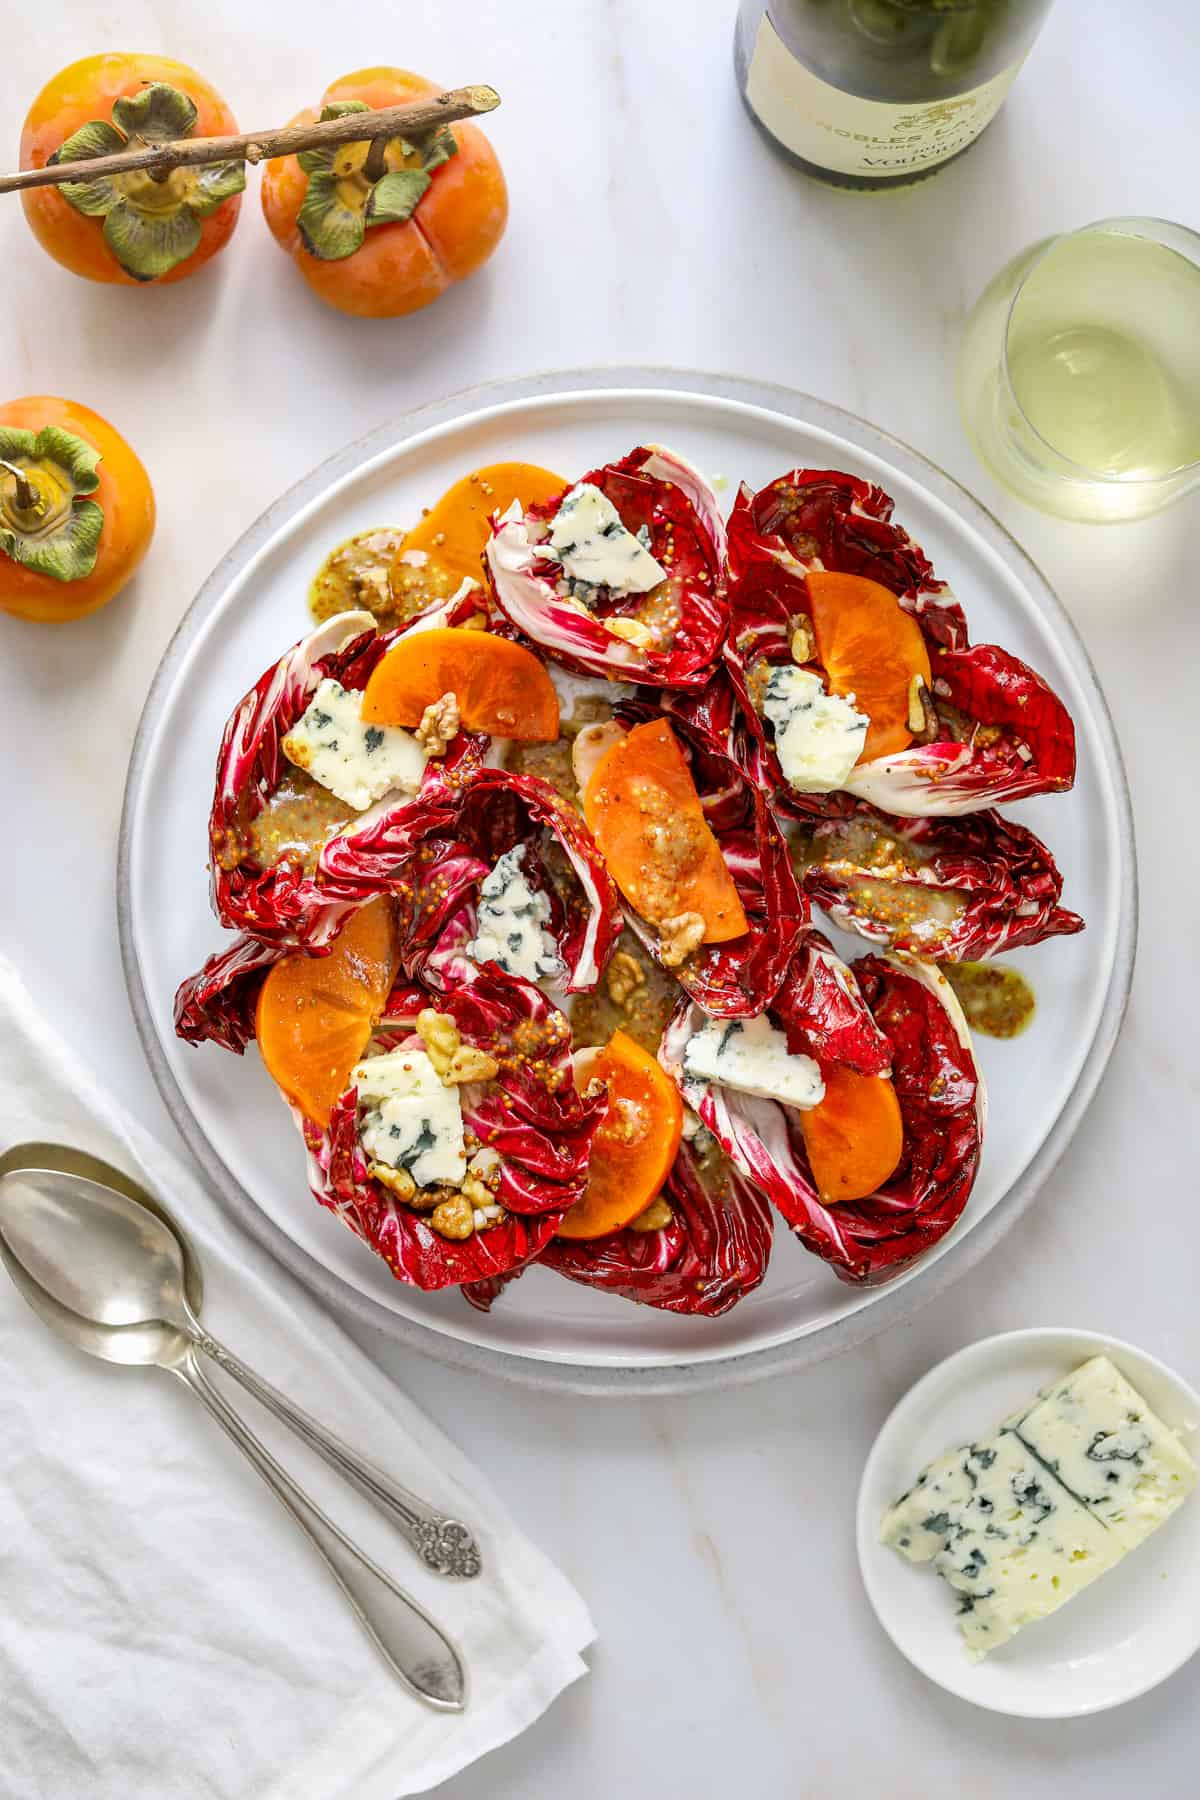 Persimmon and Blue Cheese Salad with Grainy Mustard Vinaigrette